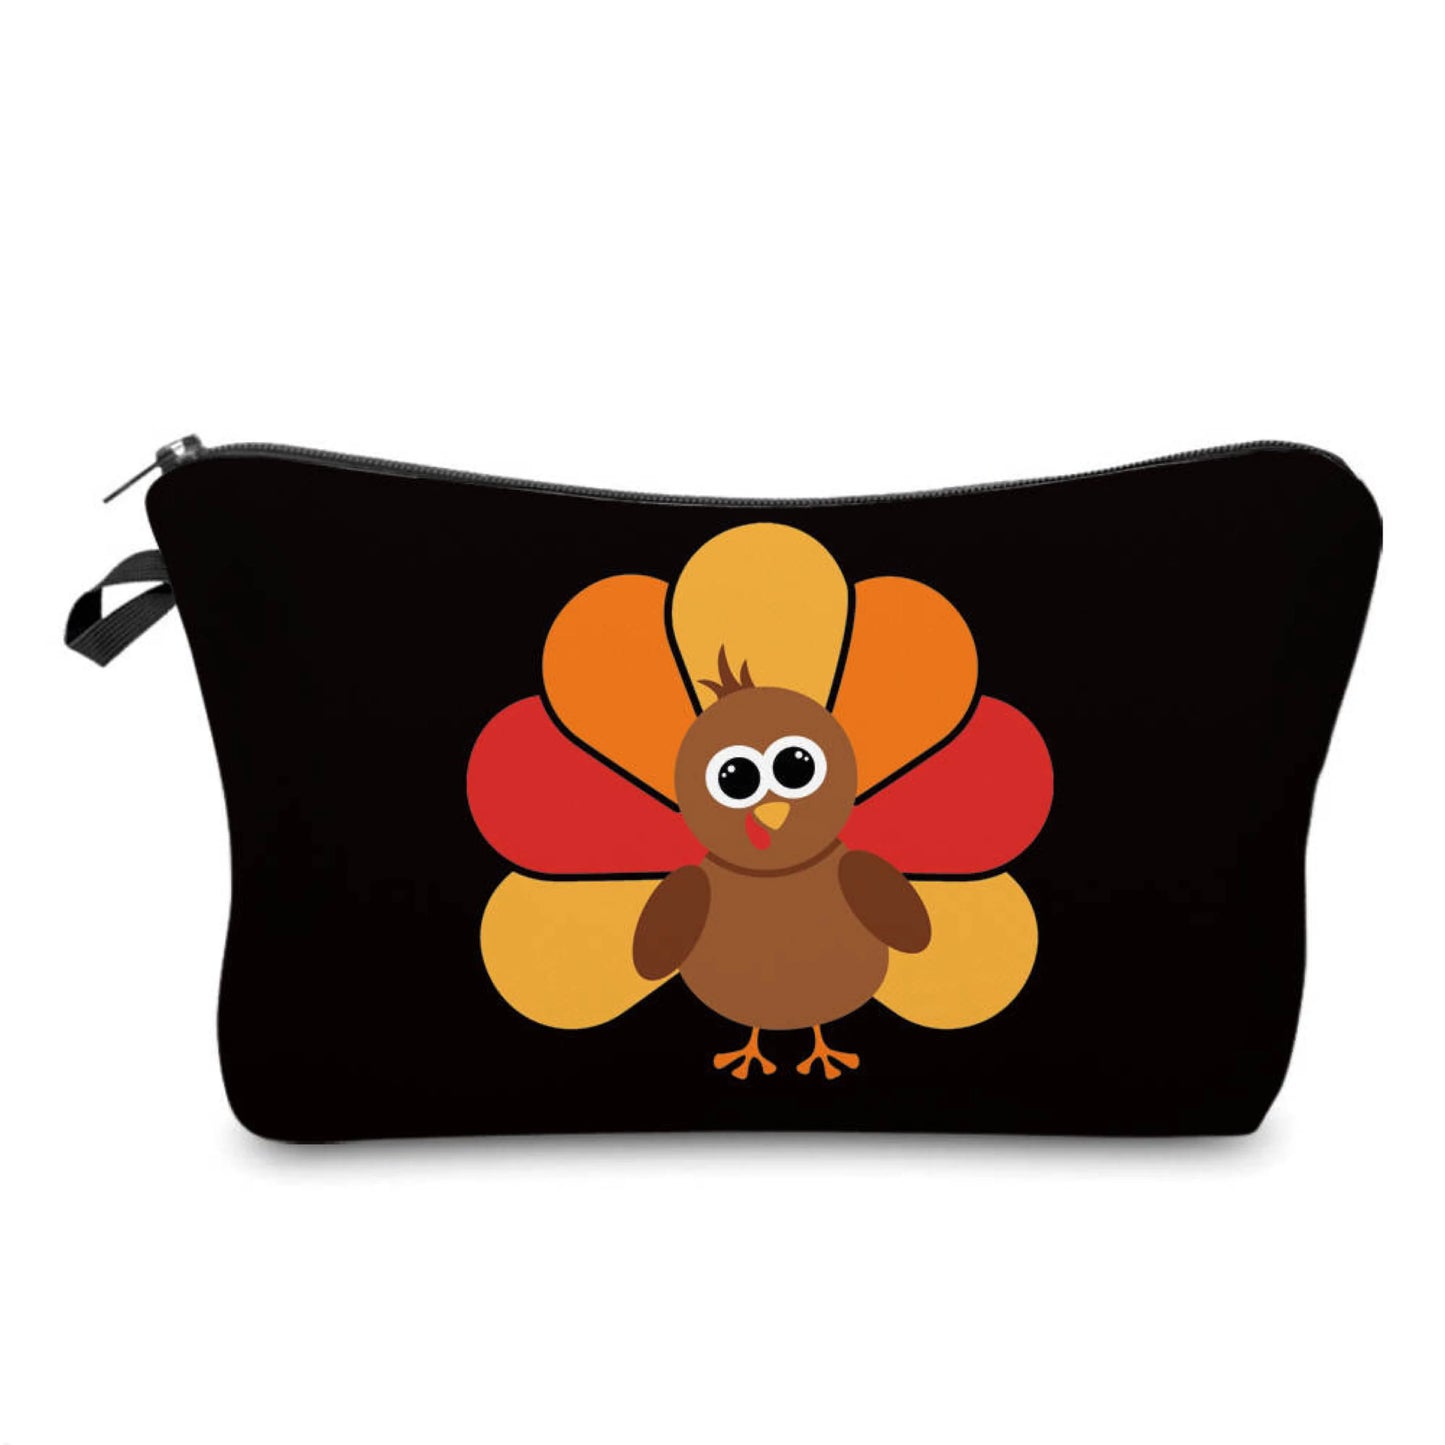 Turkey - Water-Resistant Multi-Use Pouch